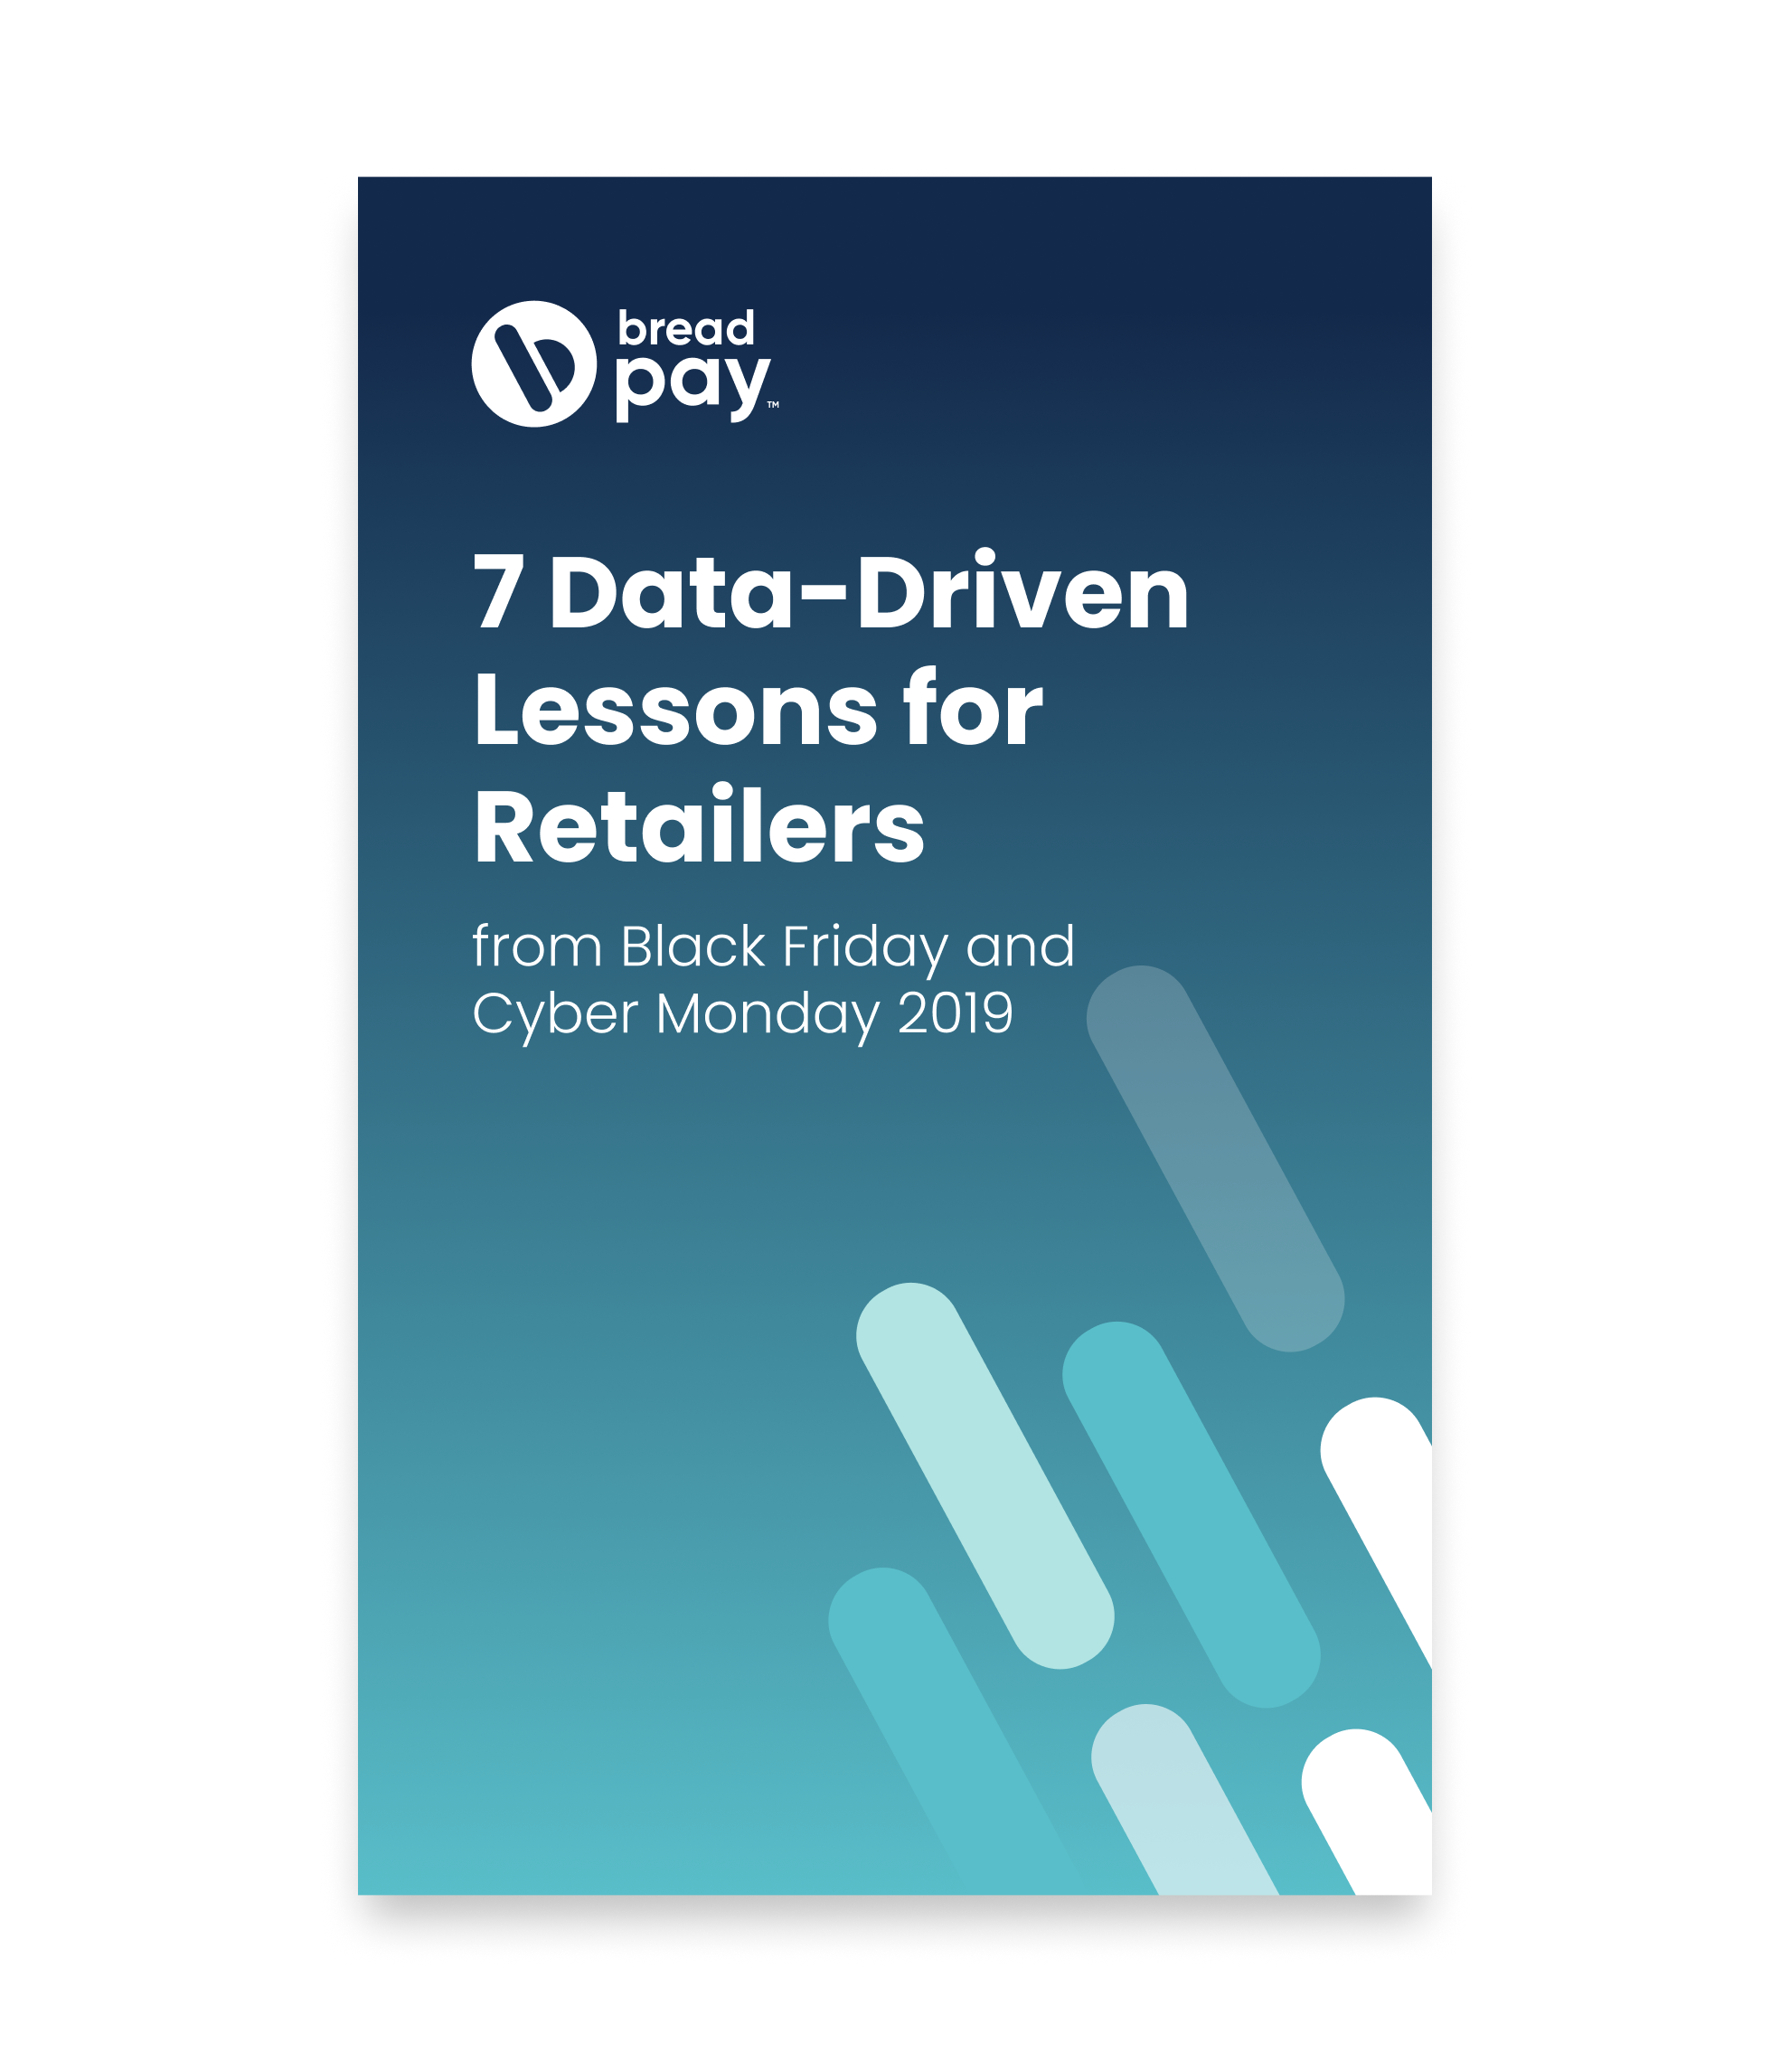 7 Data-Driven Lessons for Retailers from Black Friday and Cyber Monday 2019